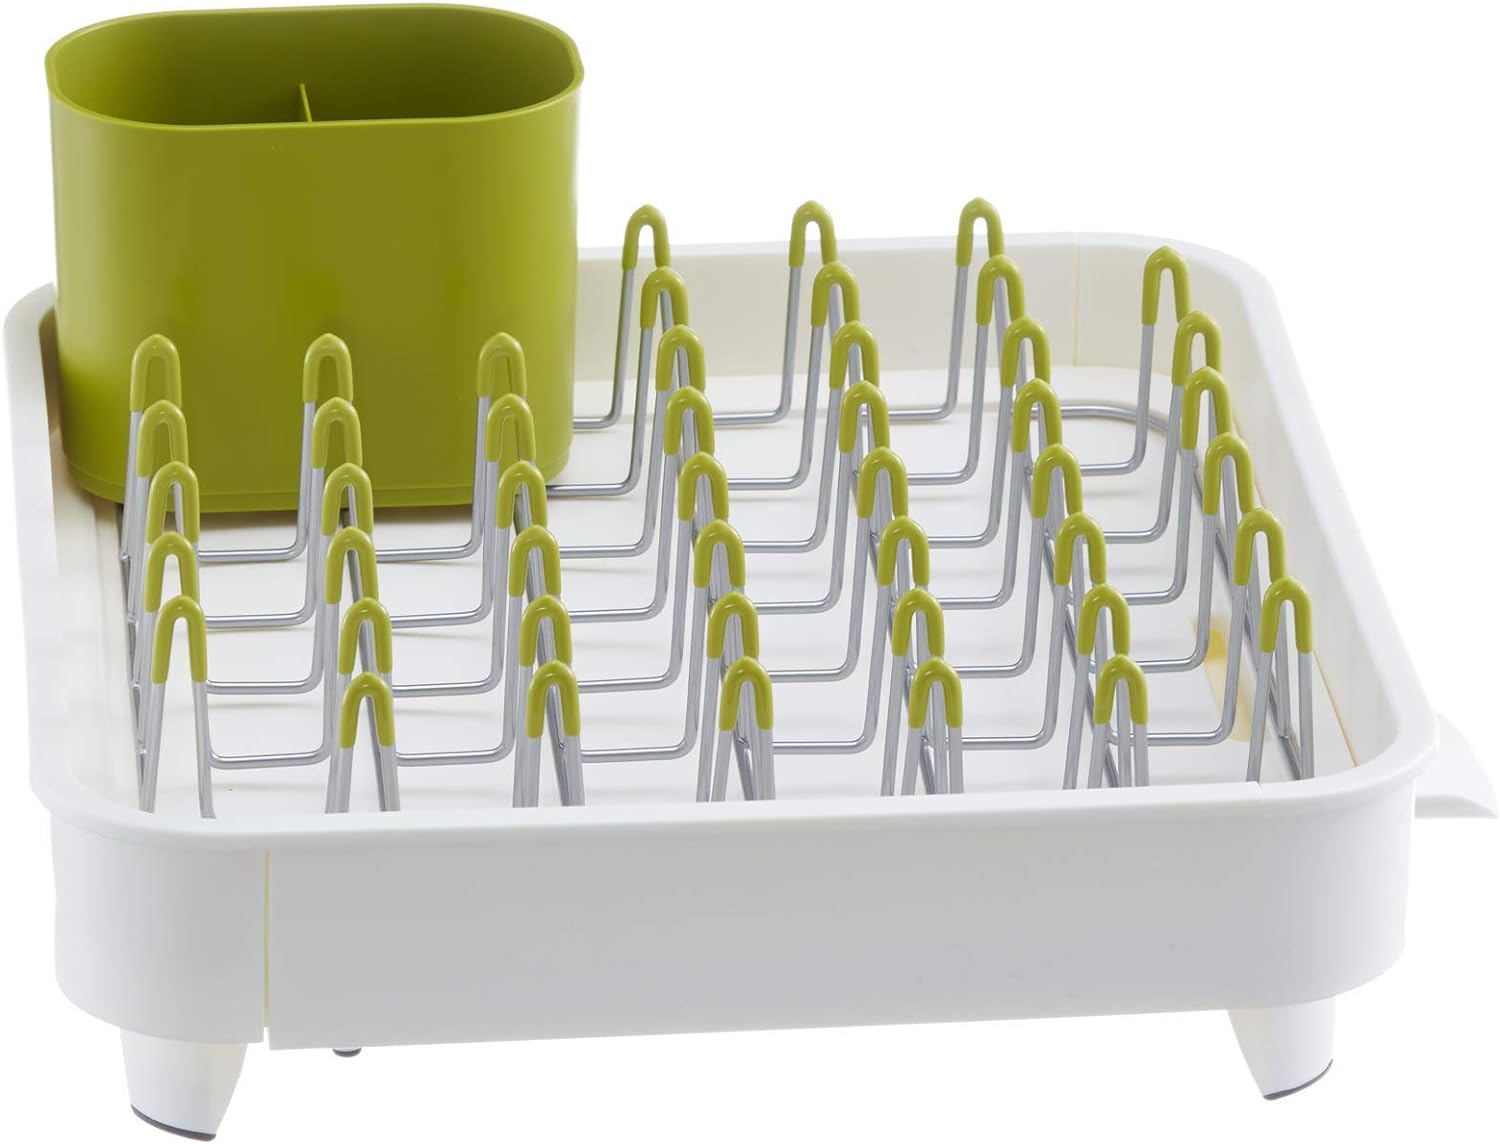 https://bigbigmart.com/wp-content/uploads/2023/10/Joseph-Joseph-85071-Extend-Expandable-Dish-Drying-Rack-and-Drainboard-Set-Foldaway-Integrated-Spout-Drainer-Removable-Steel-Rack-and-Cutlery-Holder-WhiteWhite-Green-Plastic02.jpg